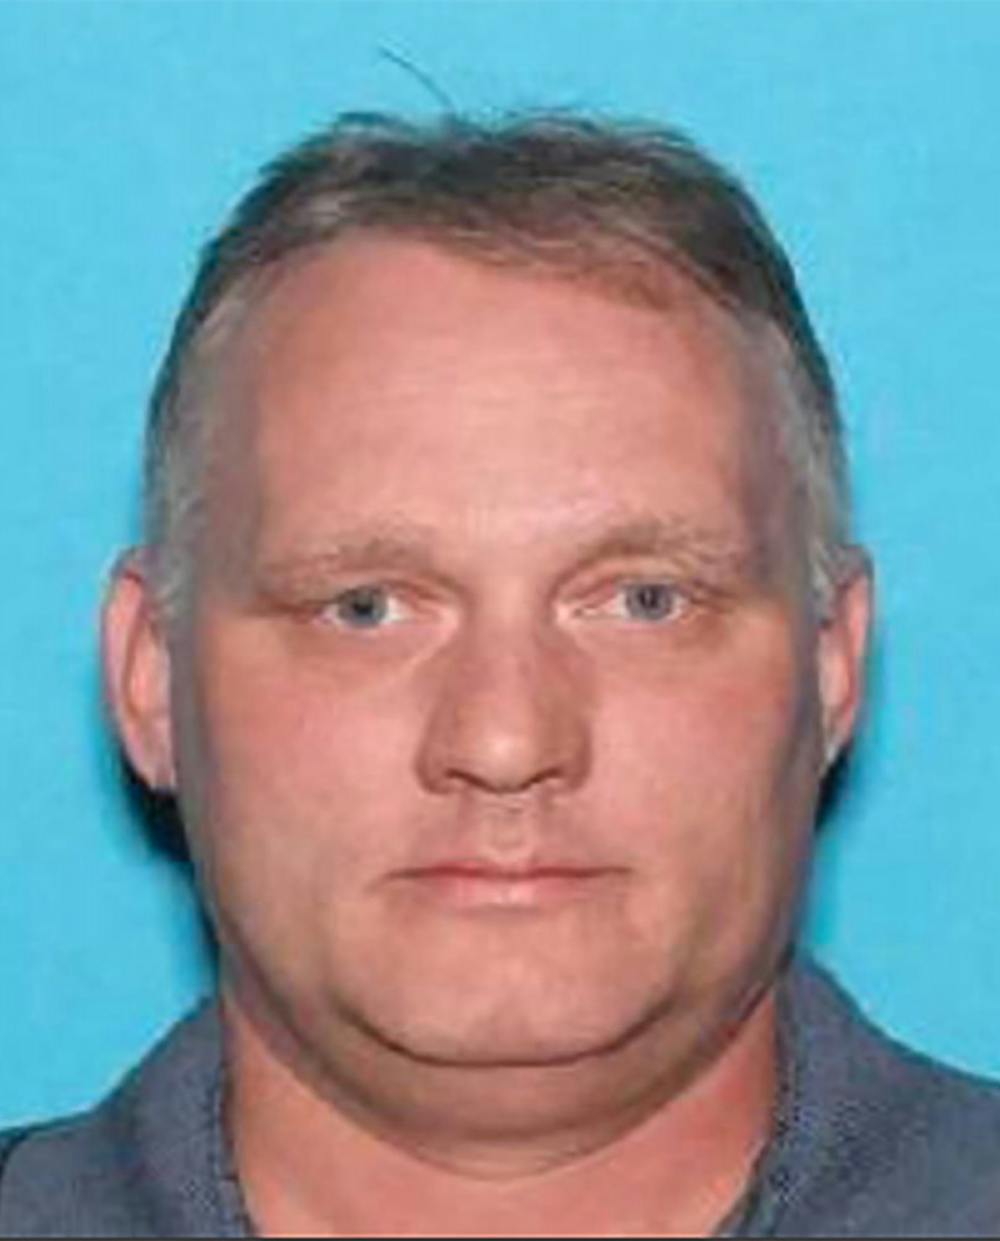 A Department of Motor Vehicles ID picture of Robert Bowers, the suspect of  the attack at the Tree of Life synagogue during a baby naming ceremony in Pittsburgh, on Saturday, Oct. 27, 2018. (Pennsylvania Department of Motor Vehicles/TNS)